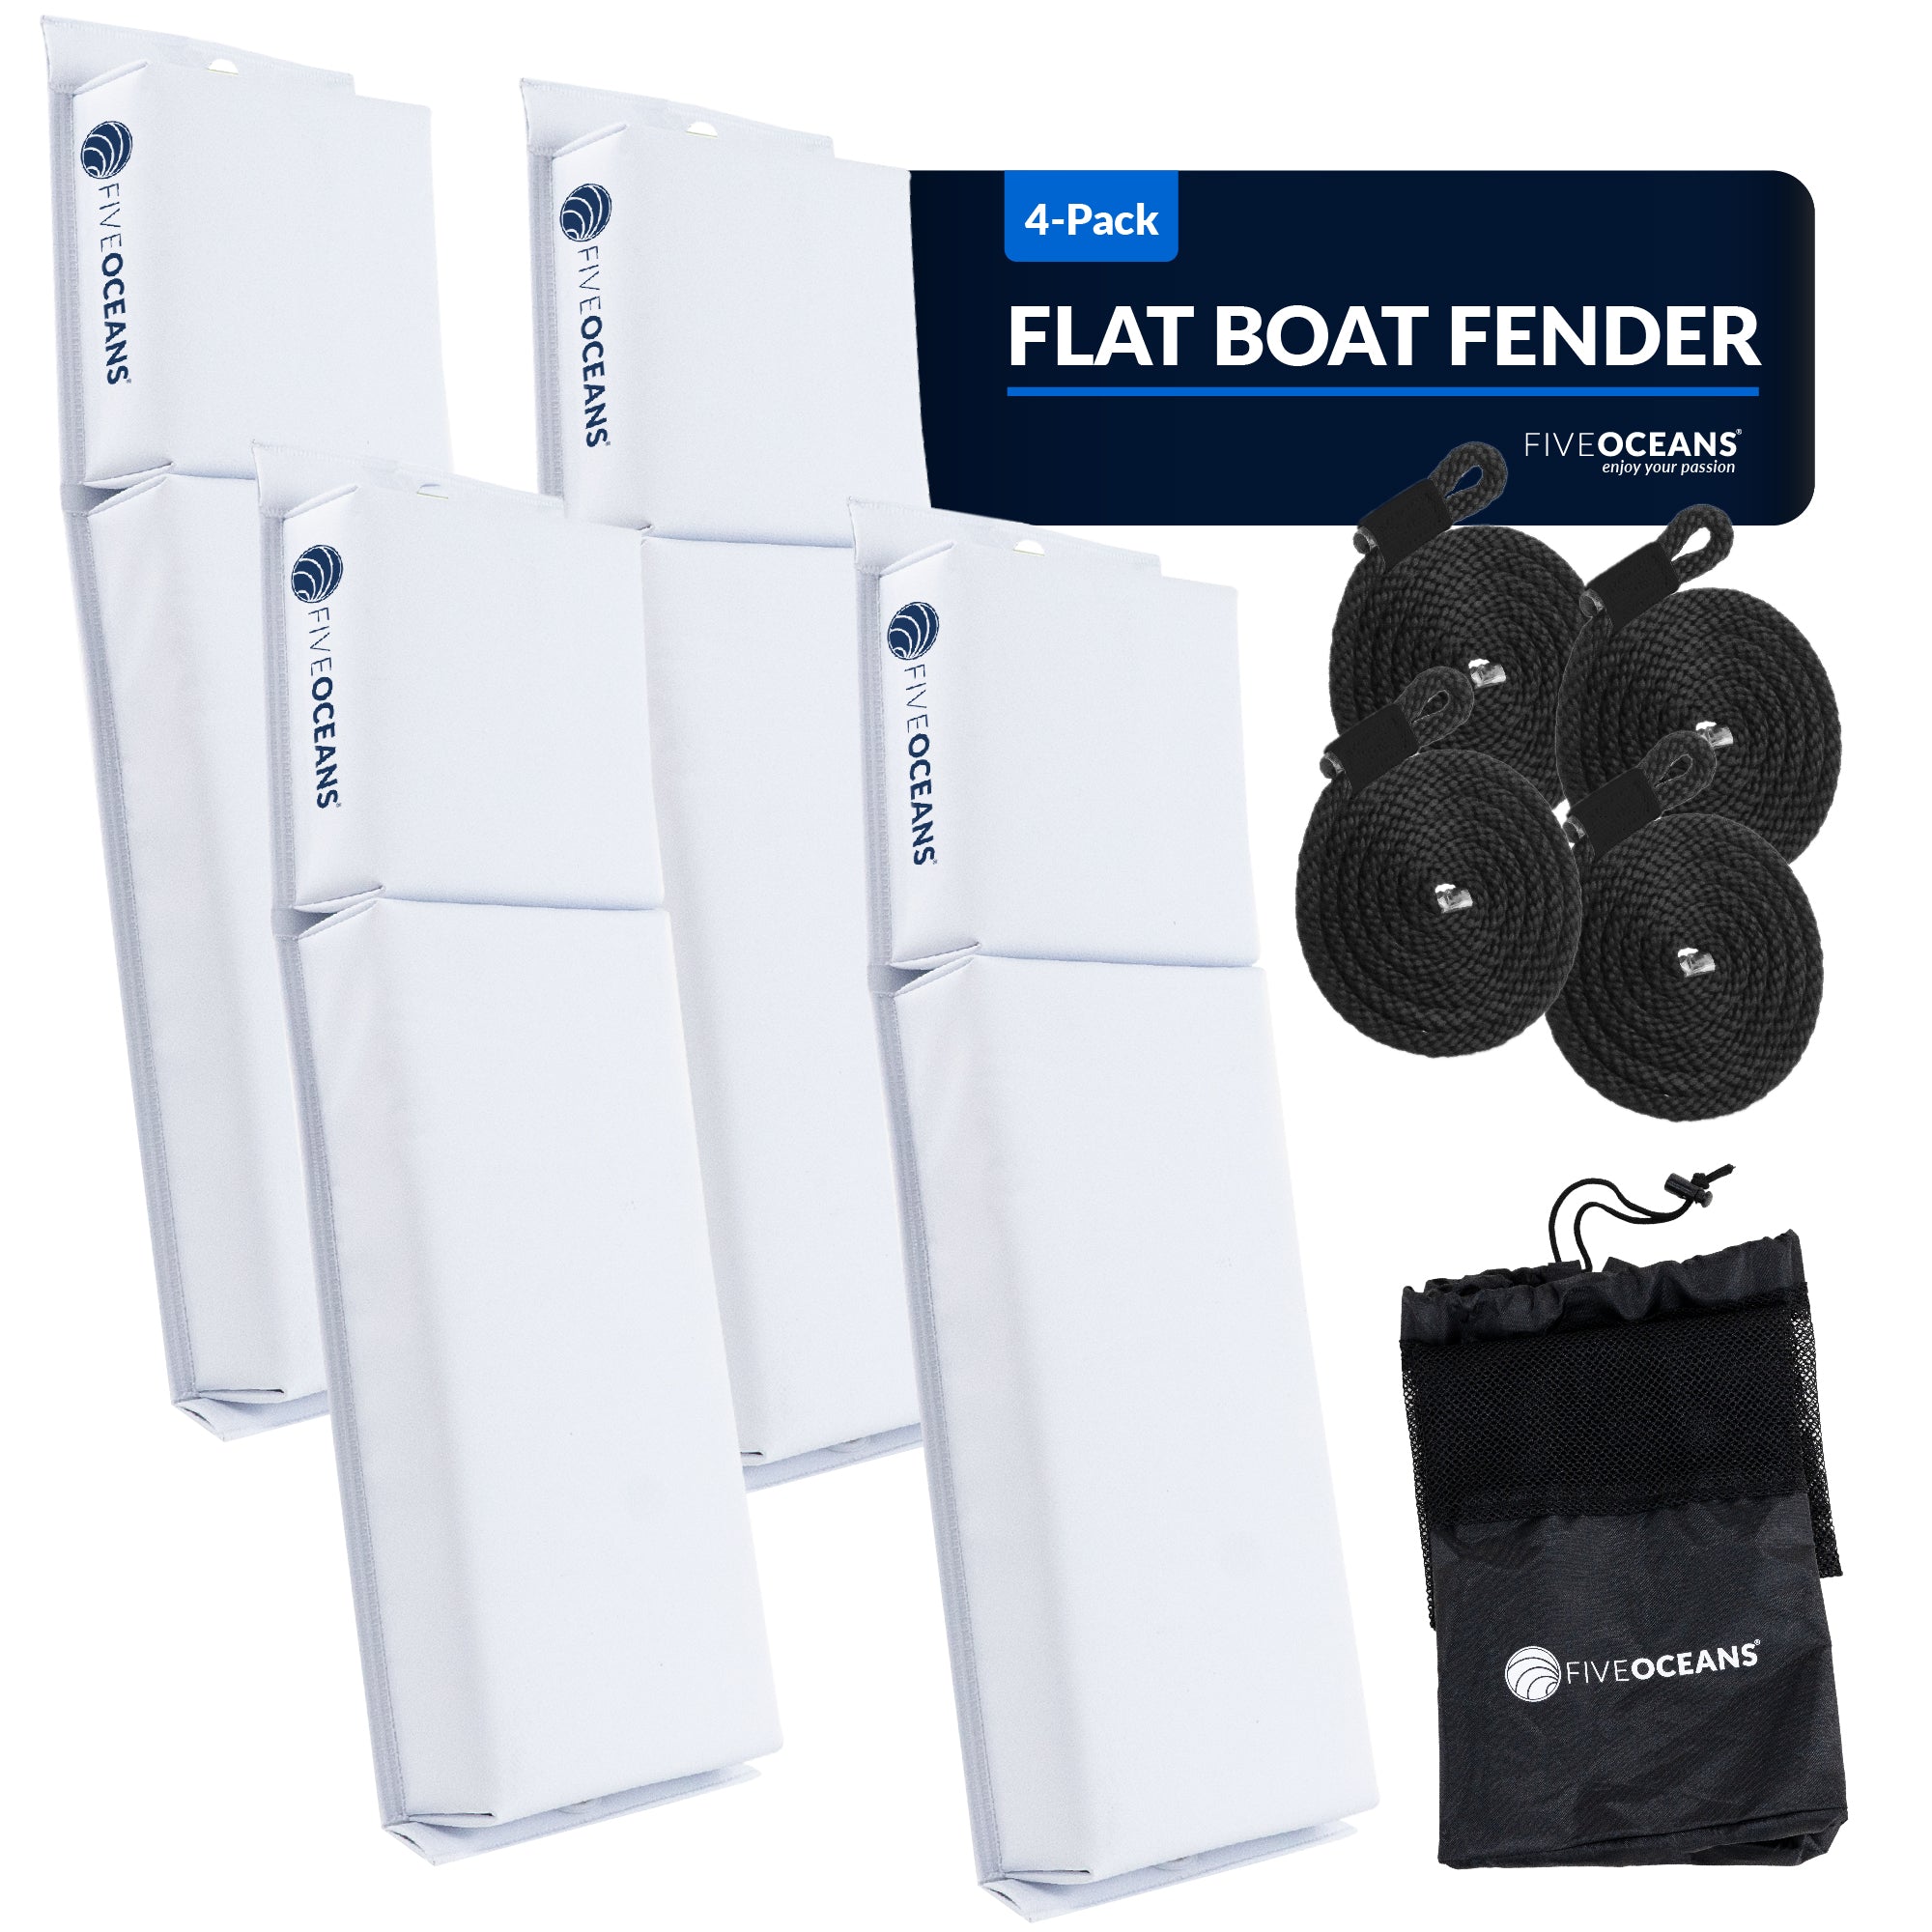 Boat Contour Fender 23-1/2" x 6-7/8" x 2-1/2", White, 4-Pack - FO4681